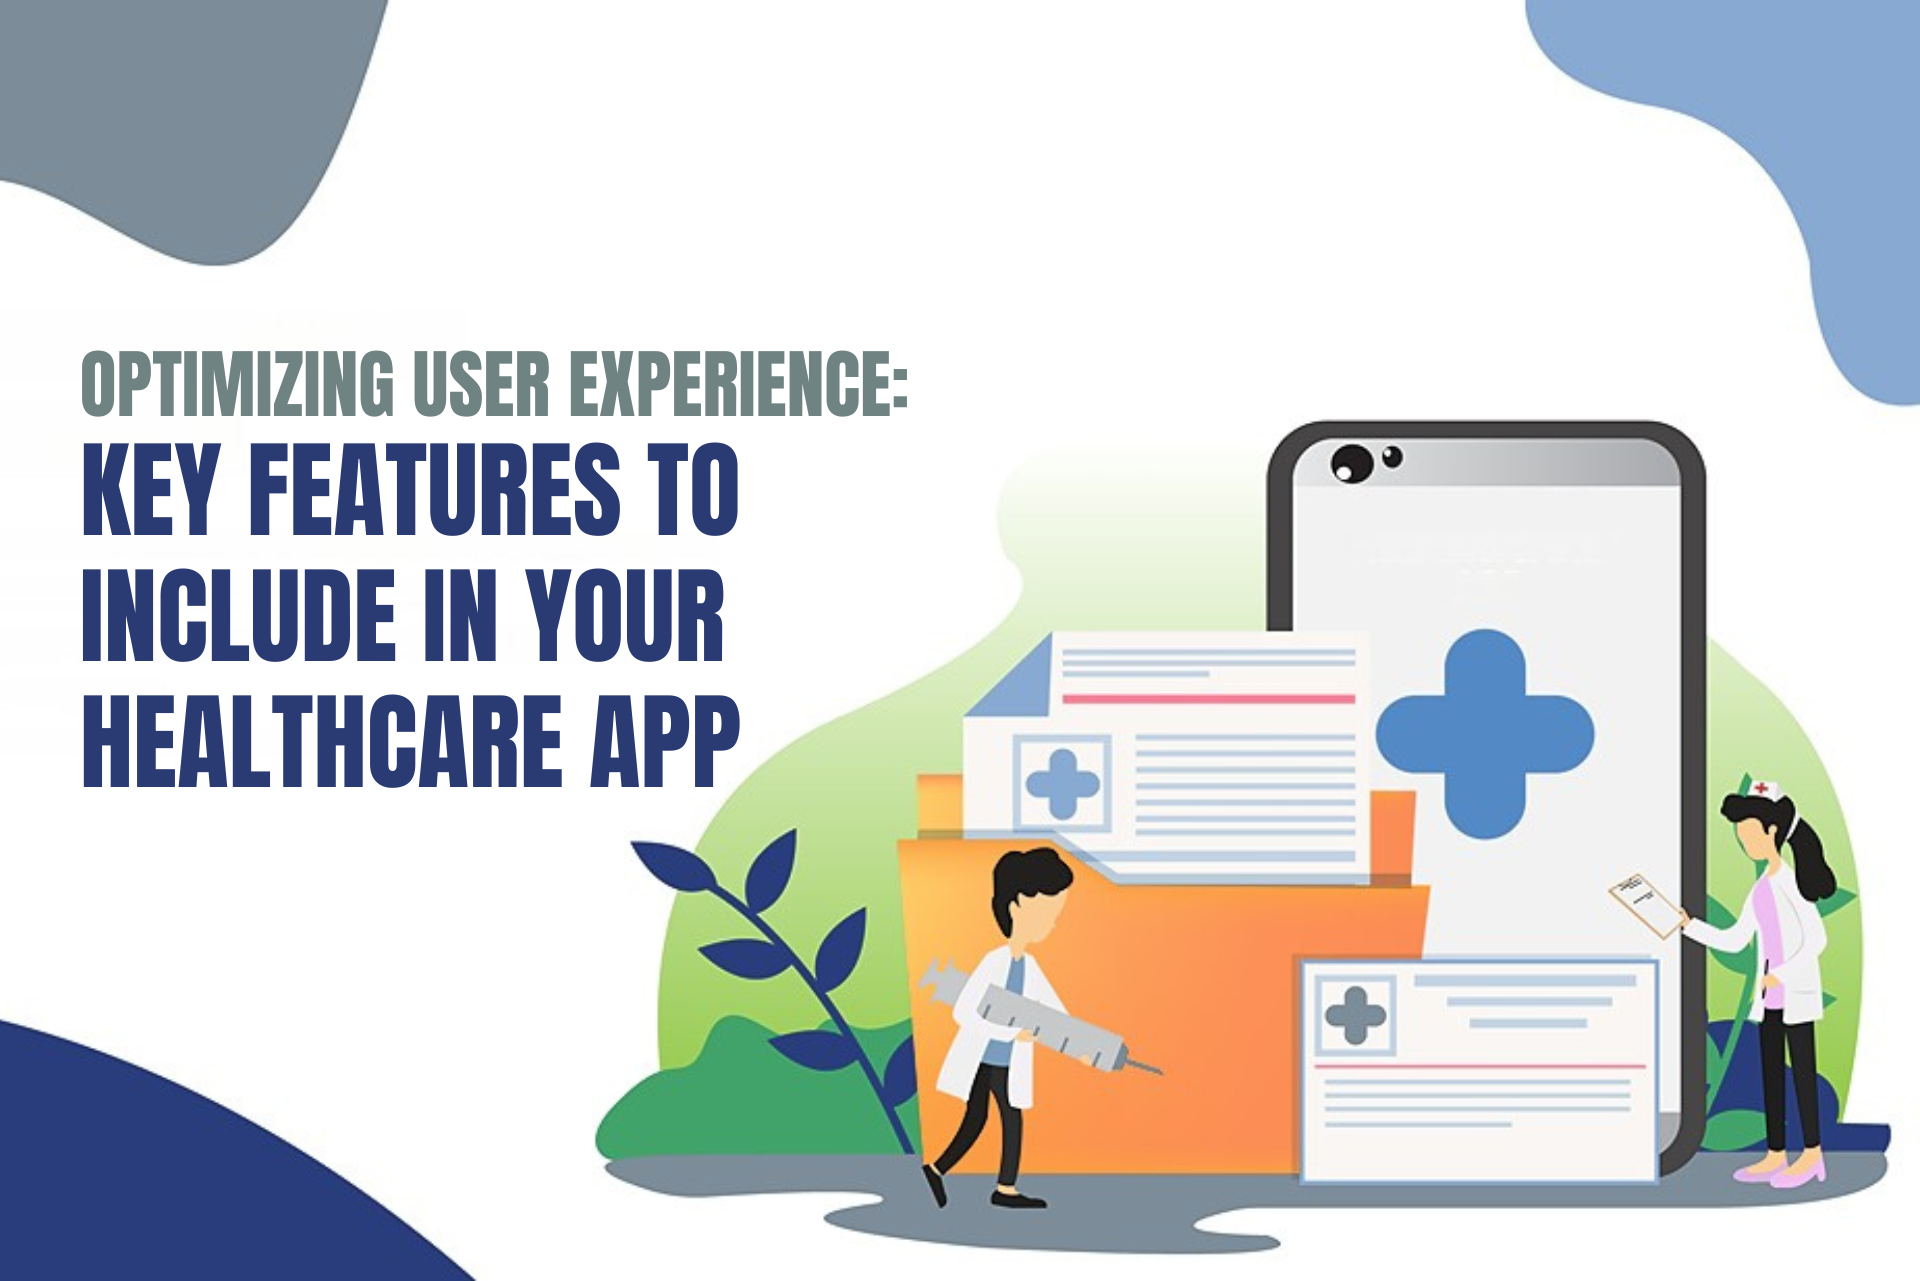 Key Features to Include in Your Healthcare App